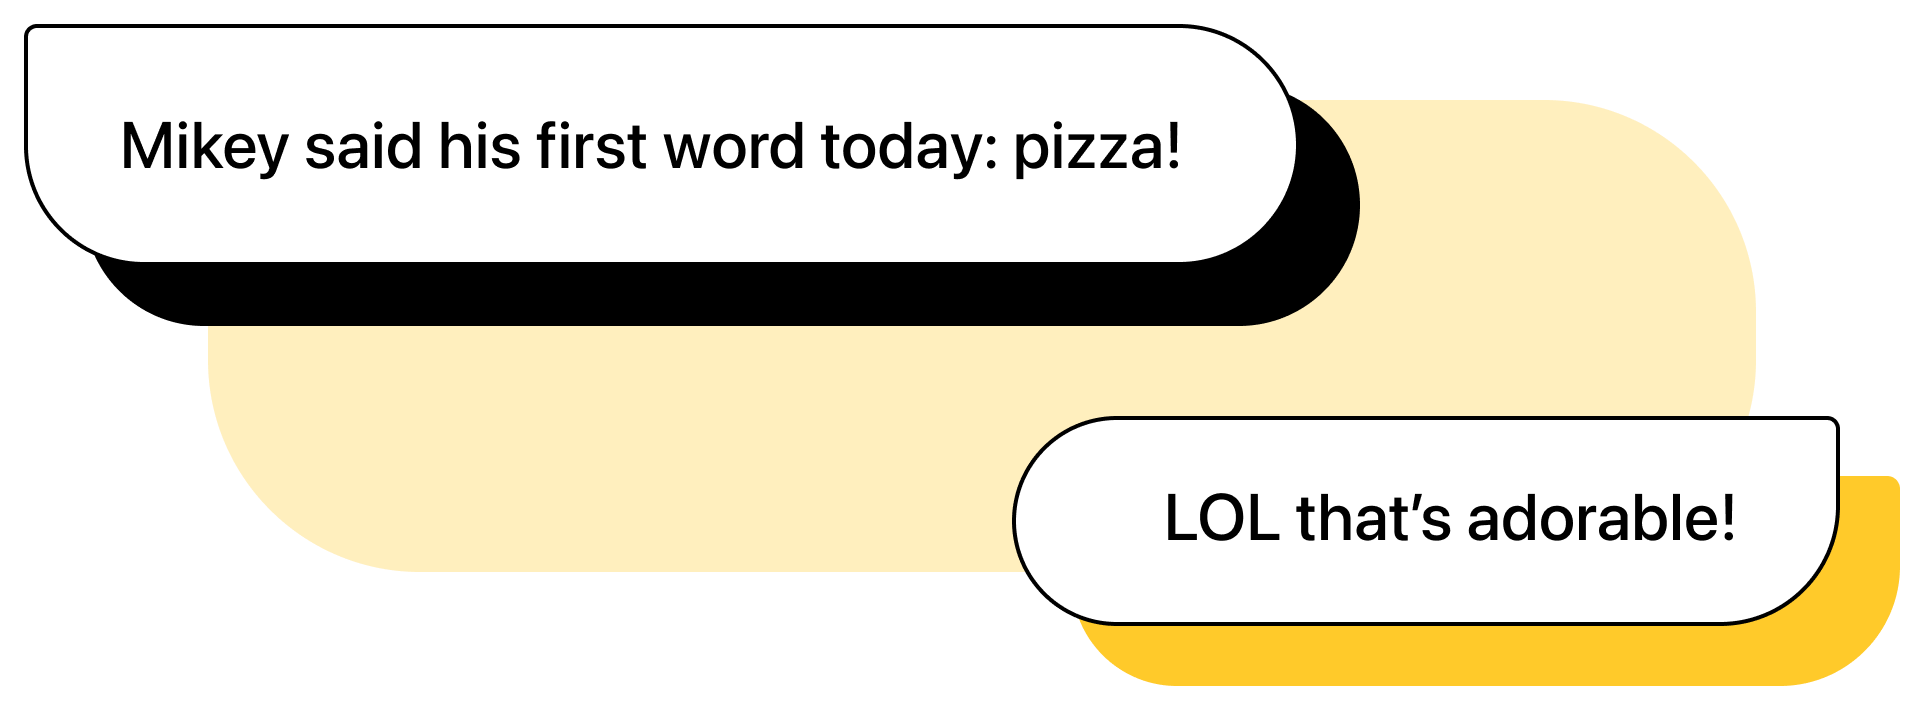 Illustration with chat bubbles. First chat bubble: "Mikey said his first word today: pizza!". Second chat bubble: "LOL that’s adorable!"